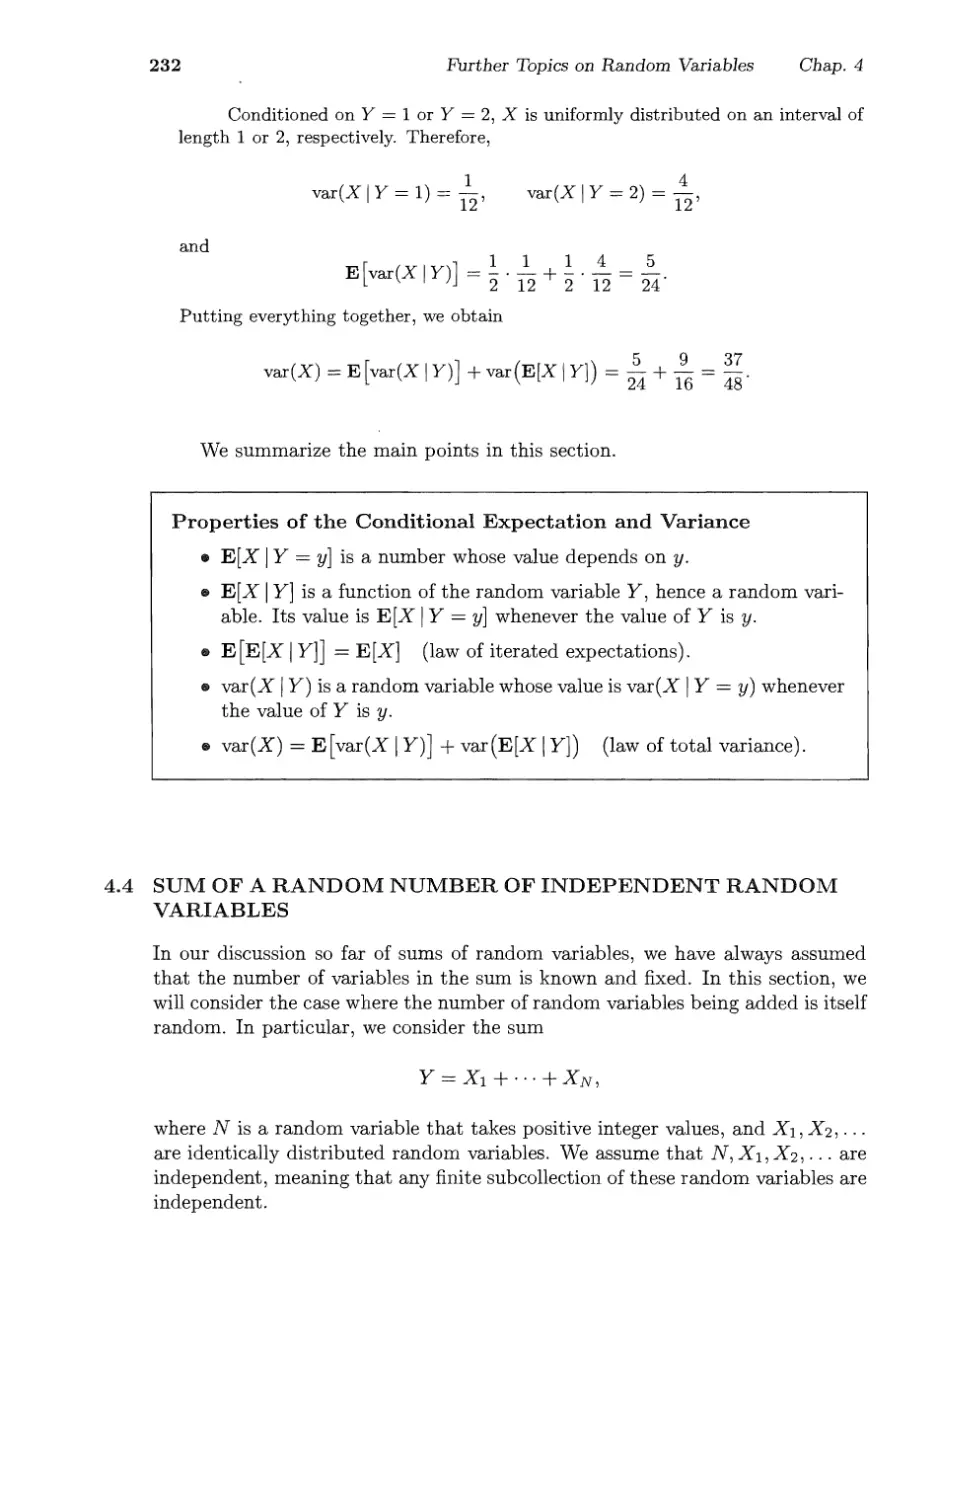 4.4 Sum of a Randon Number of Independent Random Variables